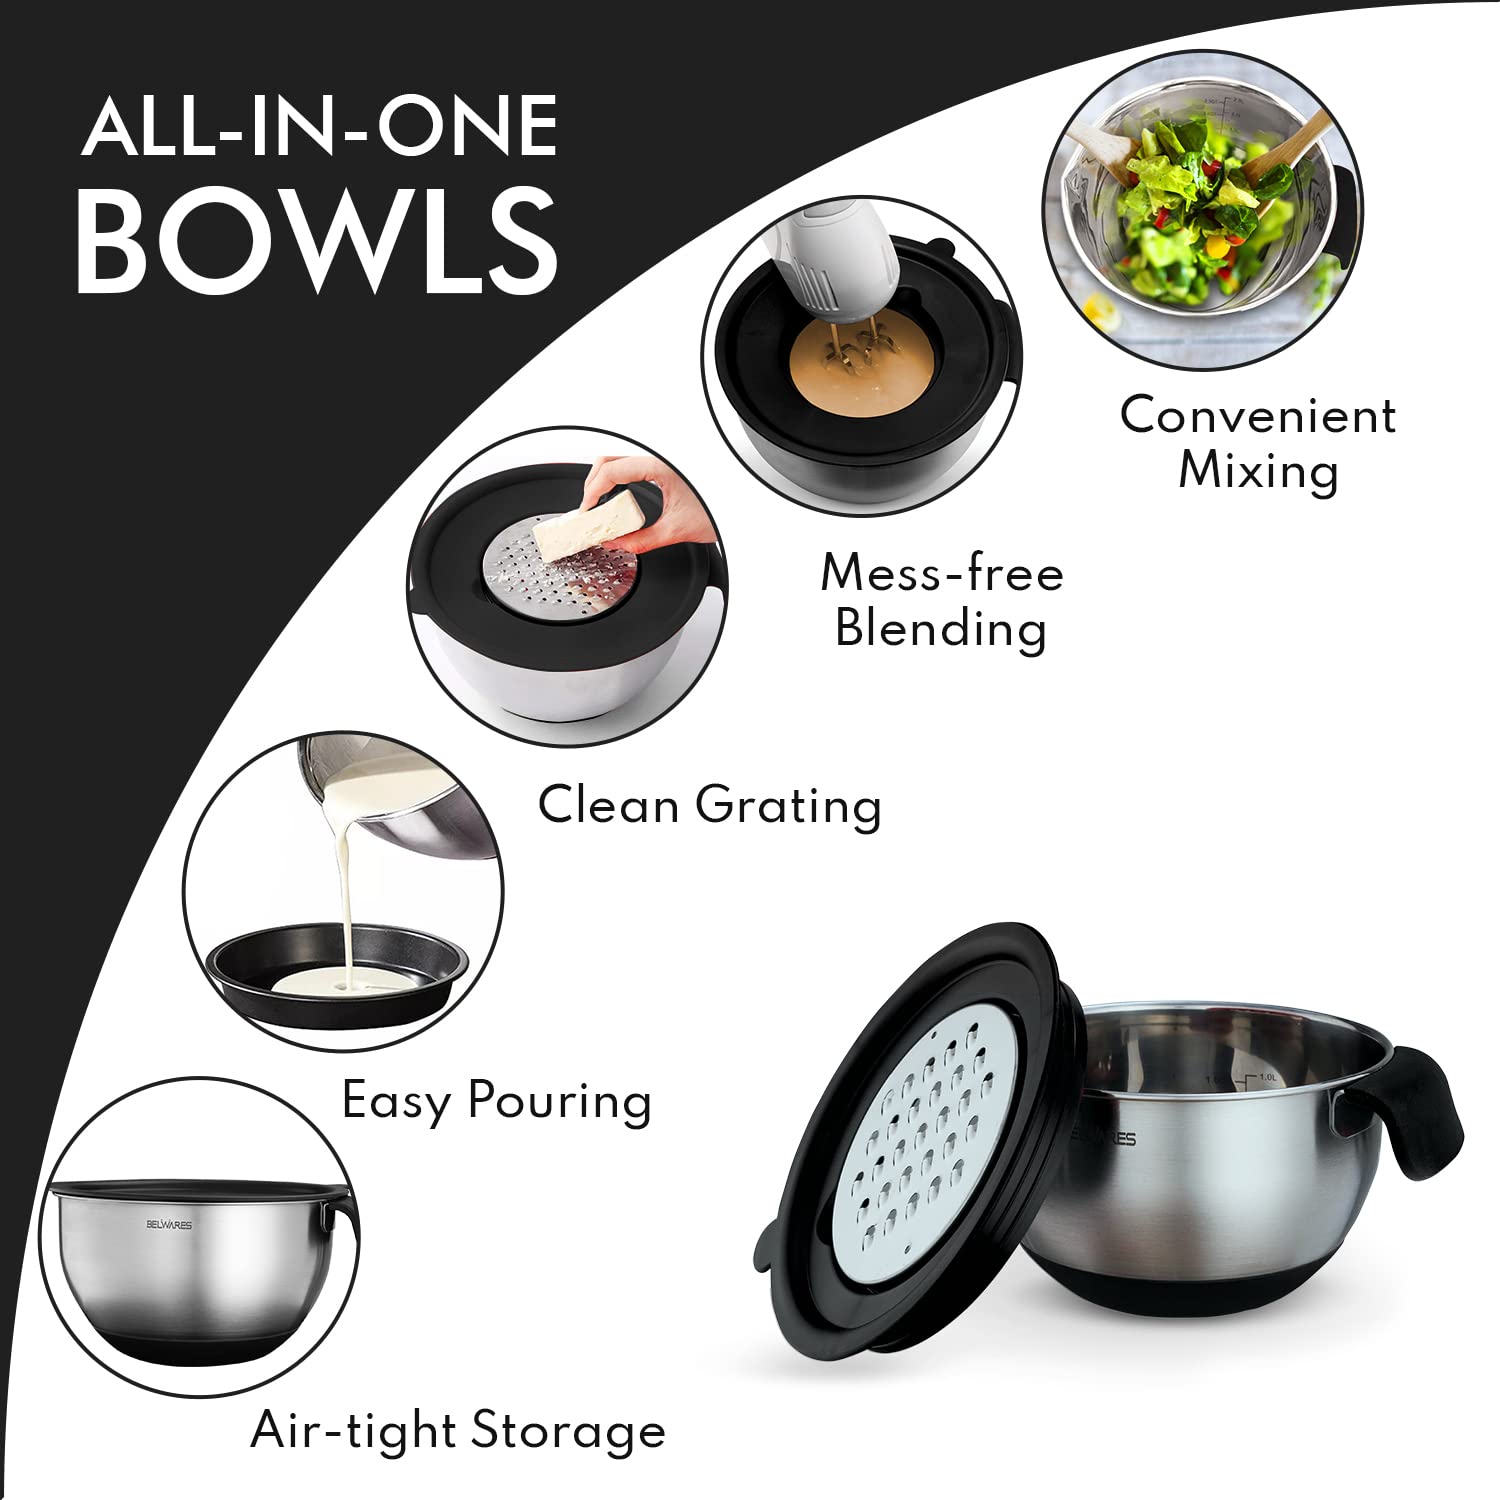 Belwares Mixing Bowls with Lids Set - Nesting Bowls with Graters, Handle, Pour Spout, Airtight Lids - Stainless Steel Non-Slip Mixing Bowl for Cooking, Baking, Prepping, Food Storage  - Good